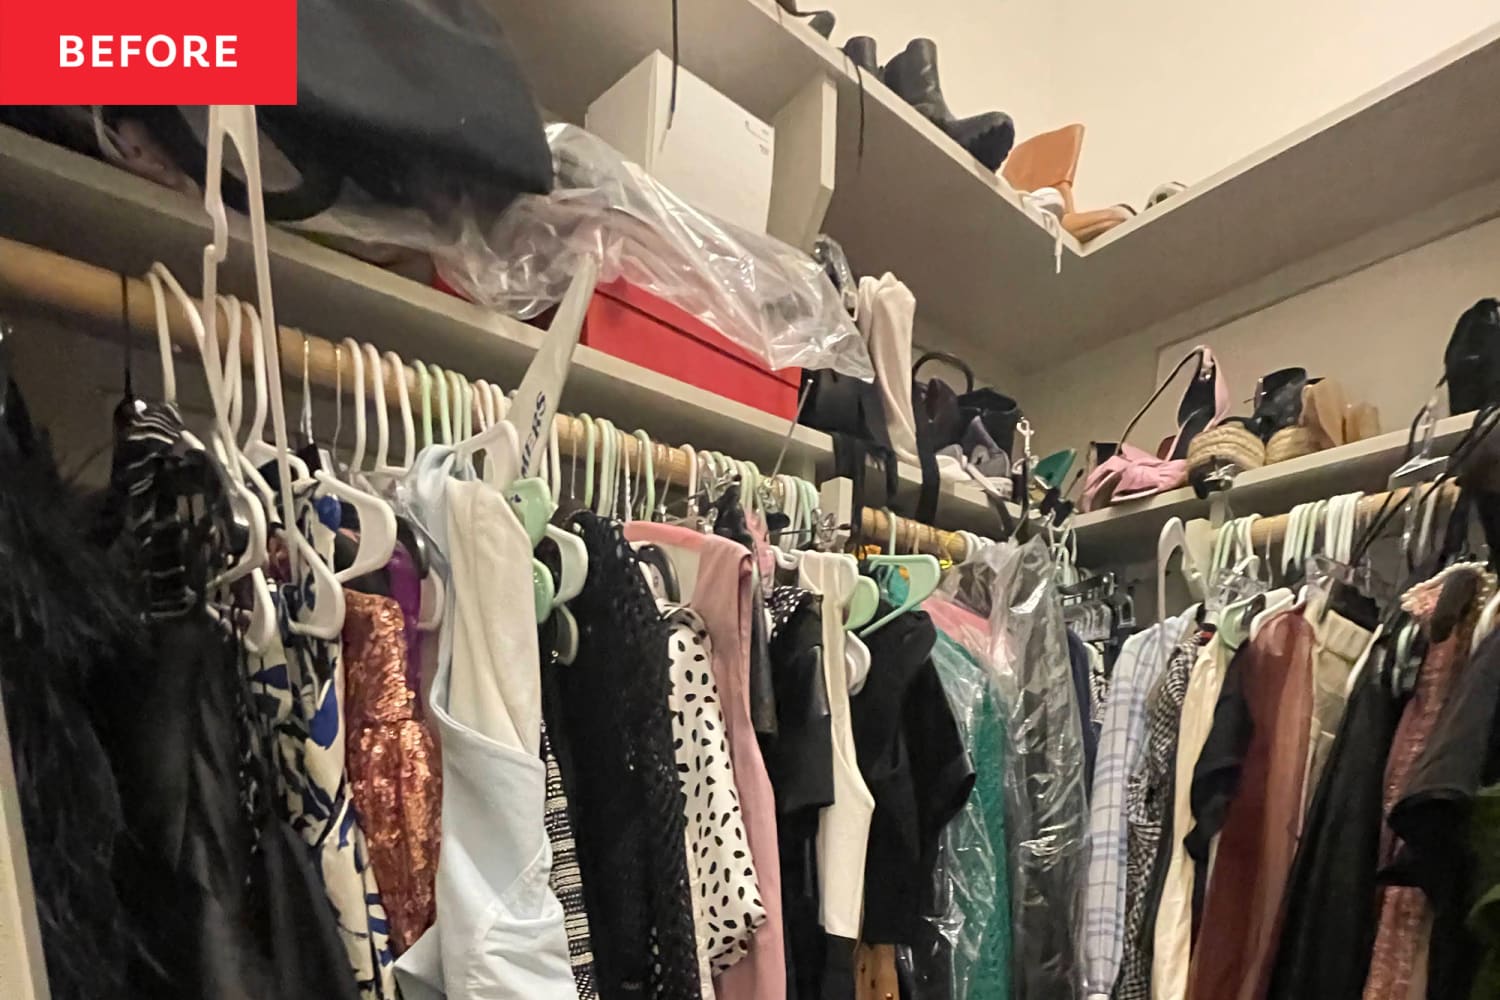 https://cdn.apartmenttherapy.info/image/upload/f_auto,q_auto:eco,c_fill,g_auto,w_1500,ar_3:2/at%2Forganize-clean%2Fbefore-after%2FLayne_Brookshire_Client_Closet%2FLayneBrookshire_111372791_ClosetBefore